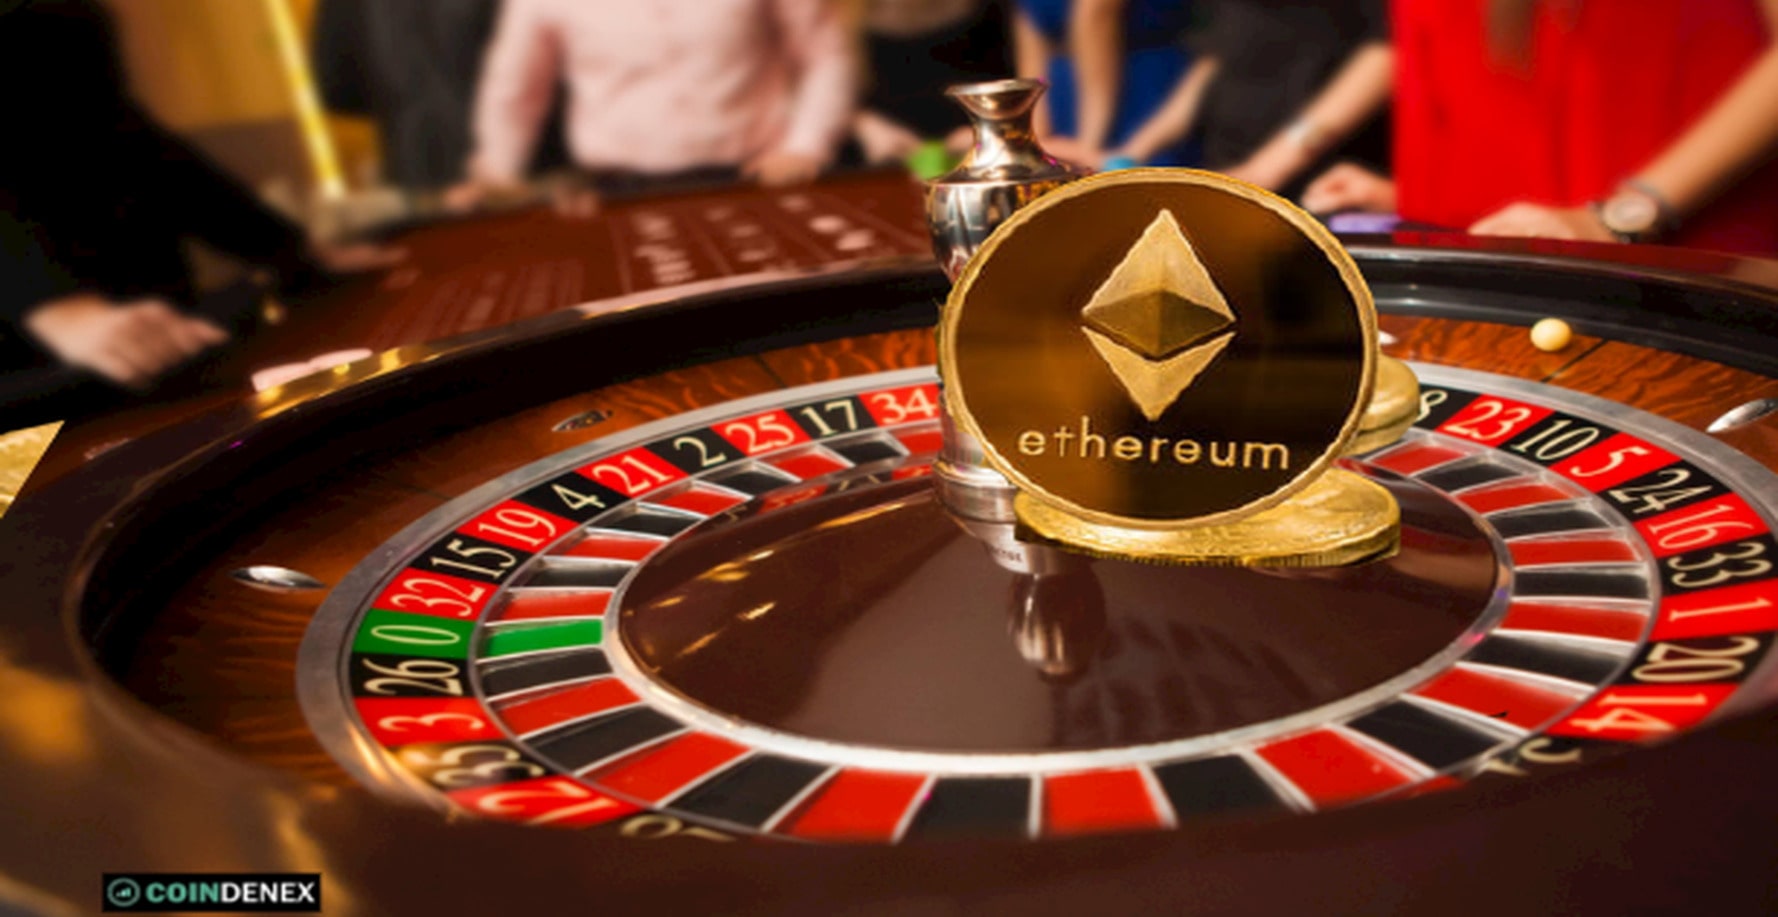 Ethereum Classic Usd Jumps Into DeFi-Analyst